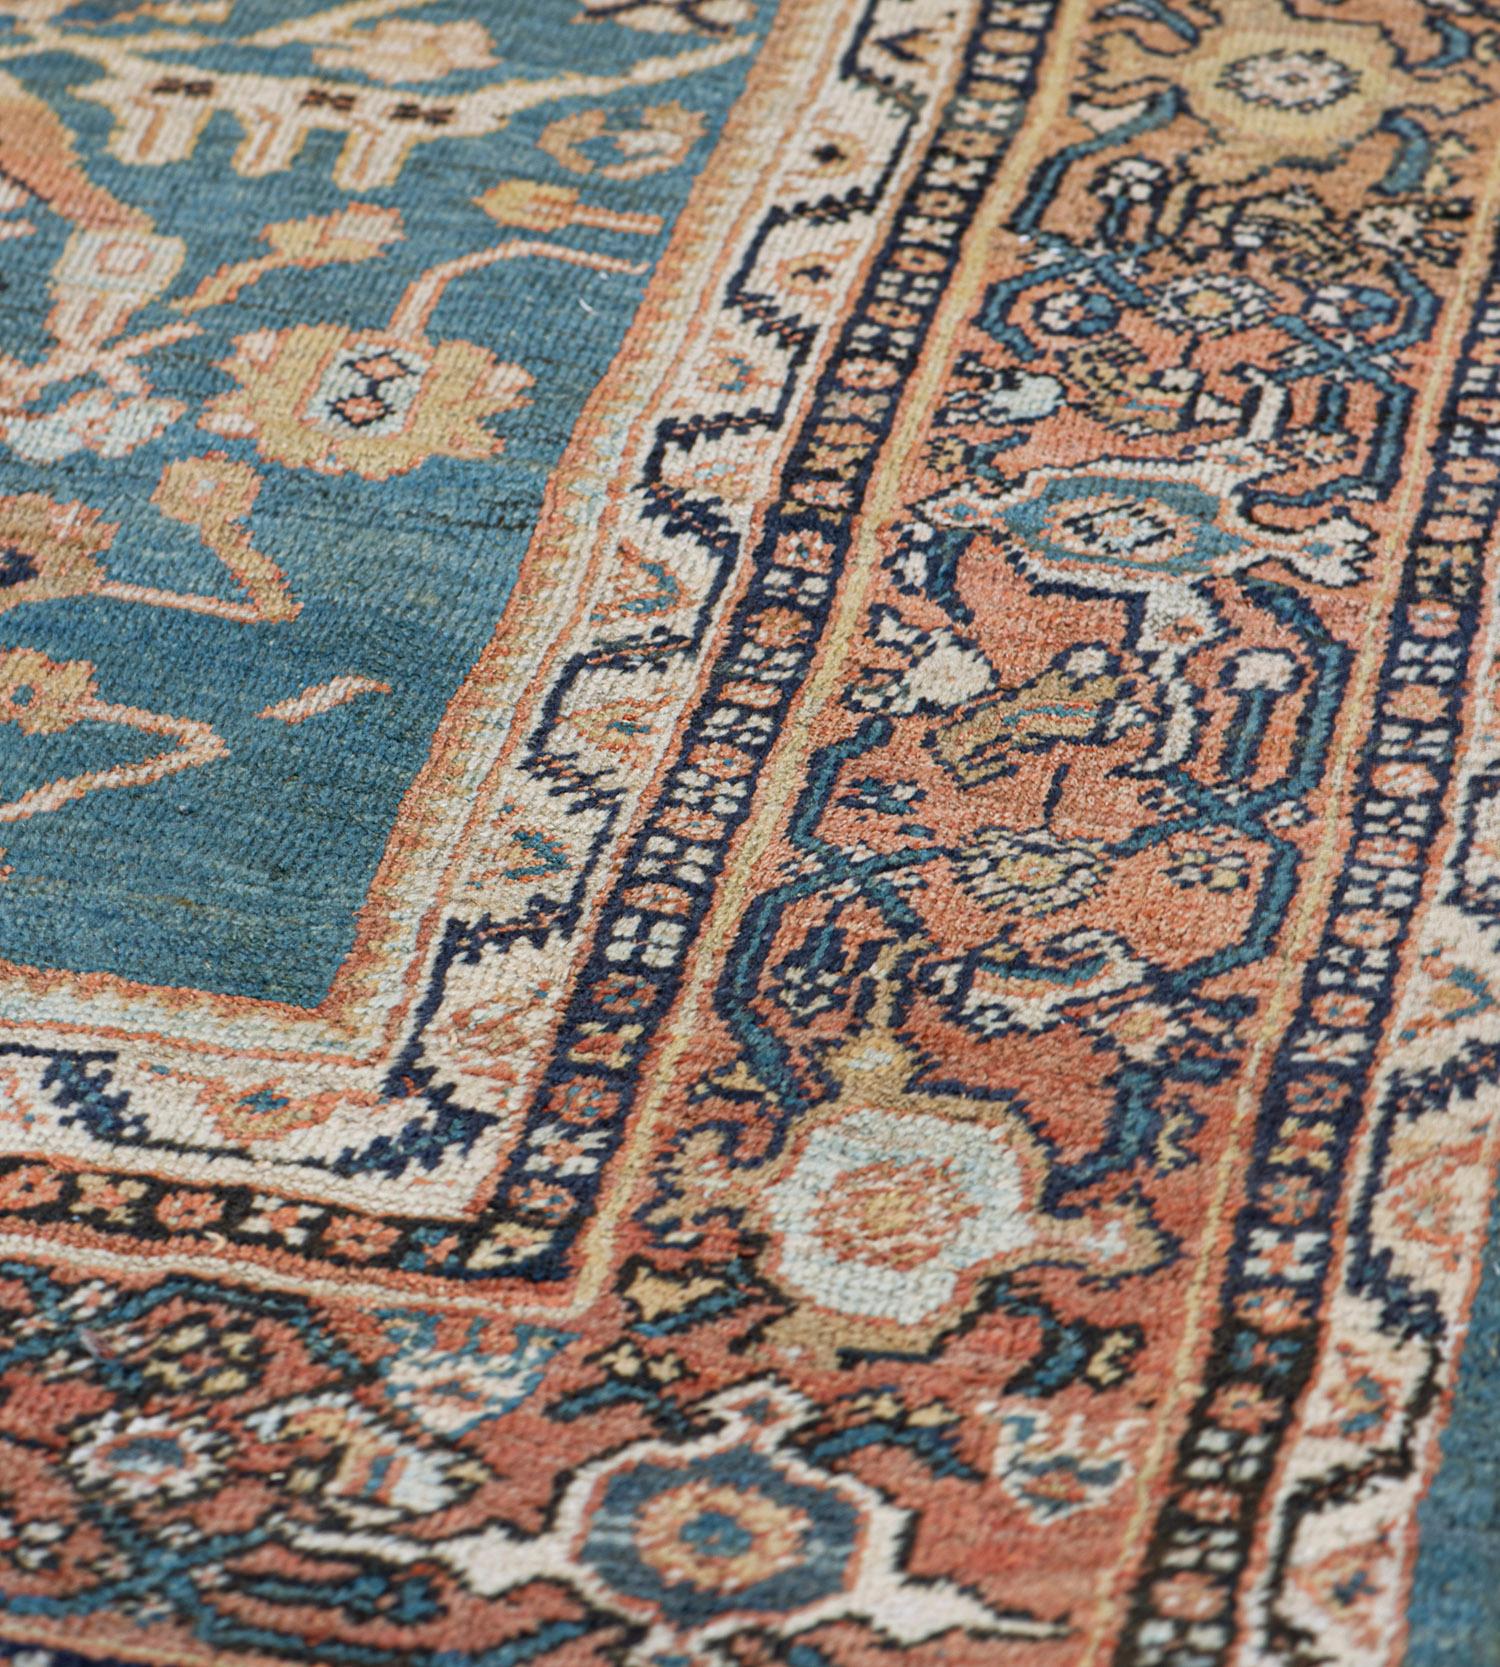 This traditional handwoven Persian Sultanabad rug has a shaded medium blue field of regal palmette pendants issuing lozenge vine forming lattice, in a shaded brick-red-orange interlocked turtle palmette border, between nuanced vine and floral